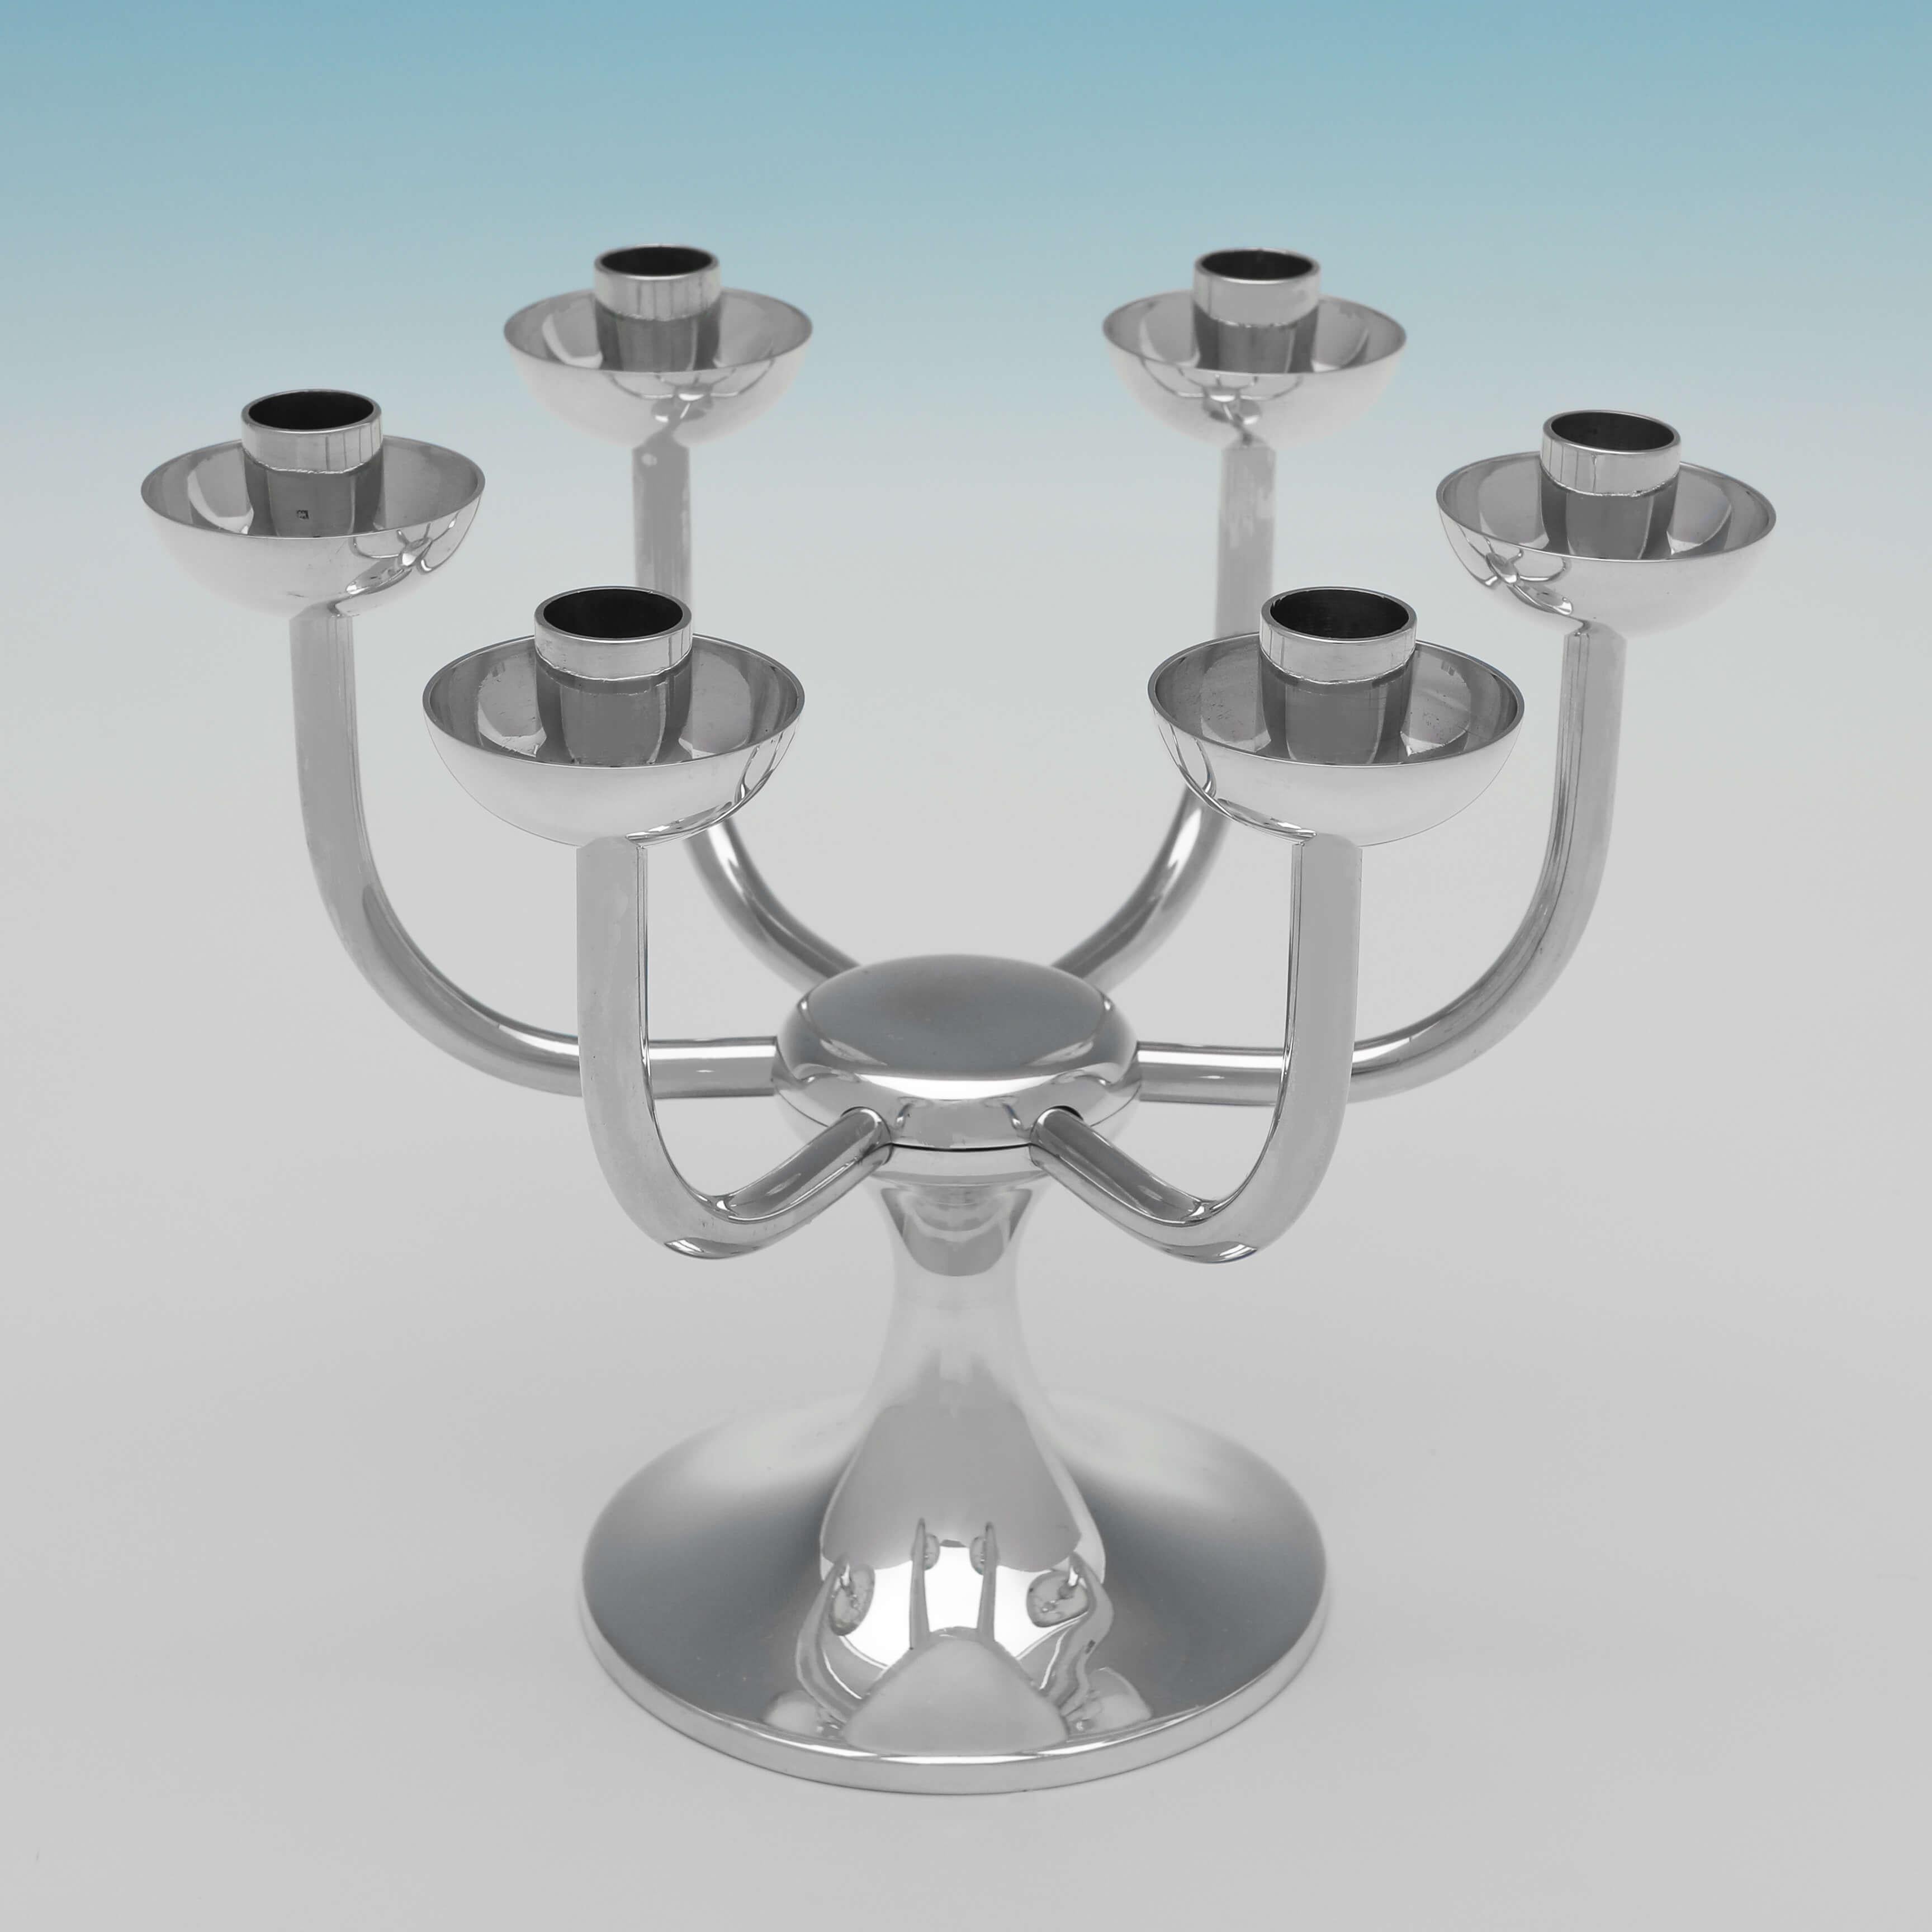 Hallmarked in Birmingham in 1973 by Robert Welch, this stylish, Sterling Silver Candelabrum, will hold 6 candles, and is in the Industrialist style Welch became famous for. The candelabrum measures 5.25